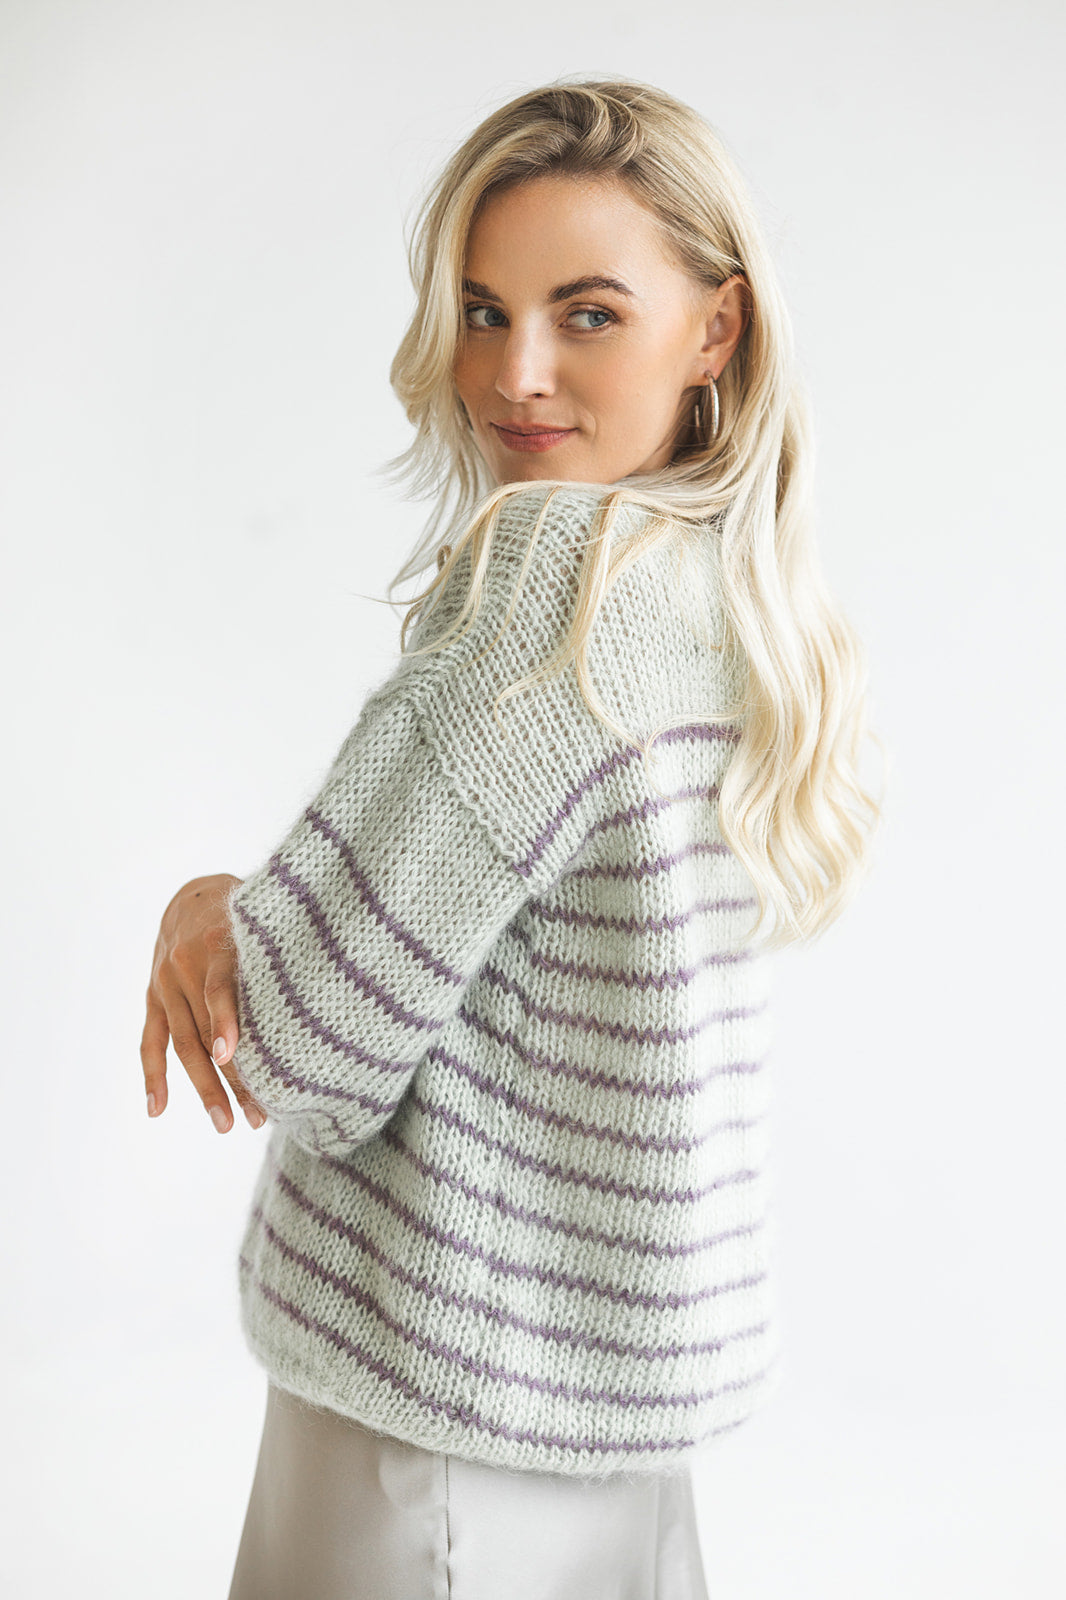 Striped pastel mint and purple mohair sweater, cable knit alpaca wool blend woman jumper, chunky slightly oversized fluffy stripes pullover